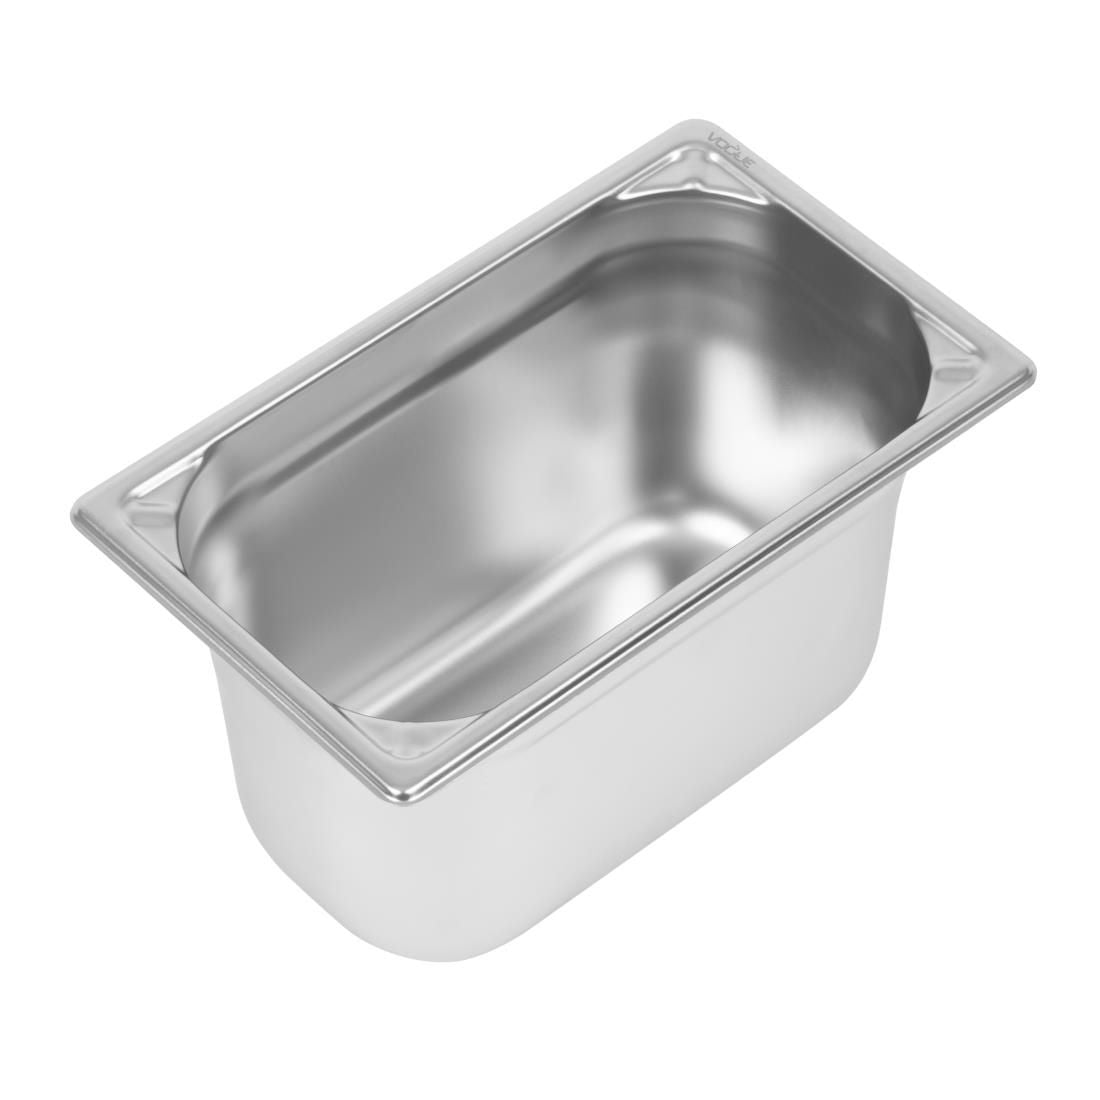 Vogue Heavy Duty Stainless Steel 1/4 Gastronorm Pan 150mm